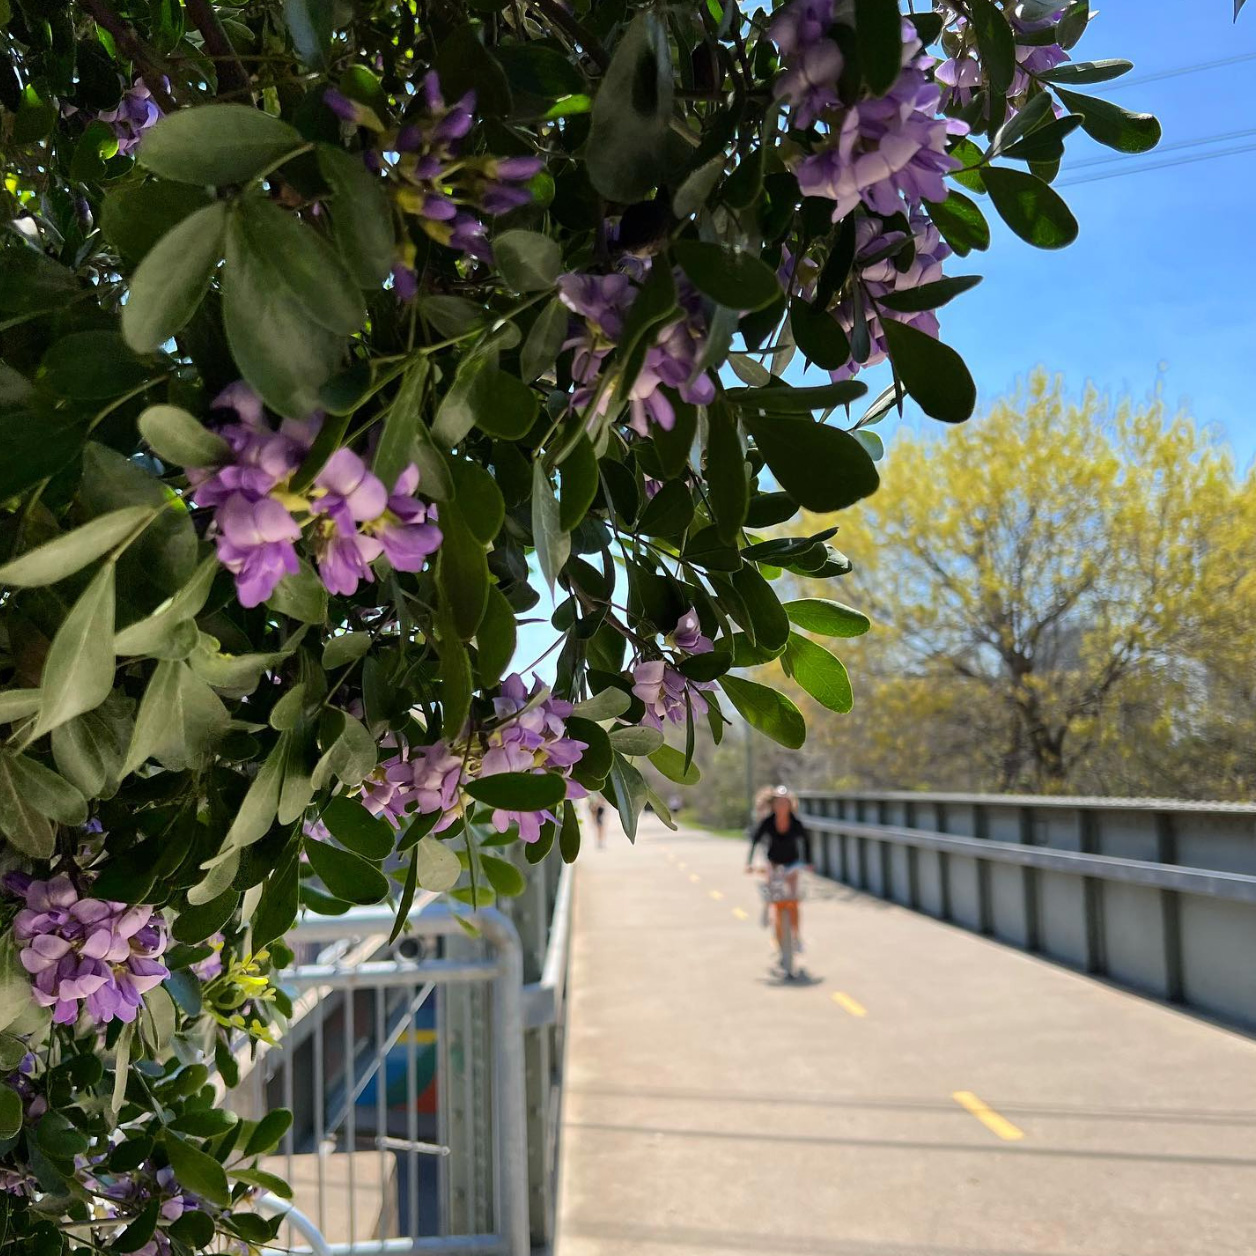 Get to know the Trails: The Katy Trail